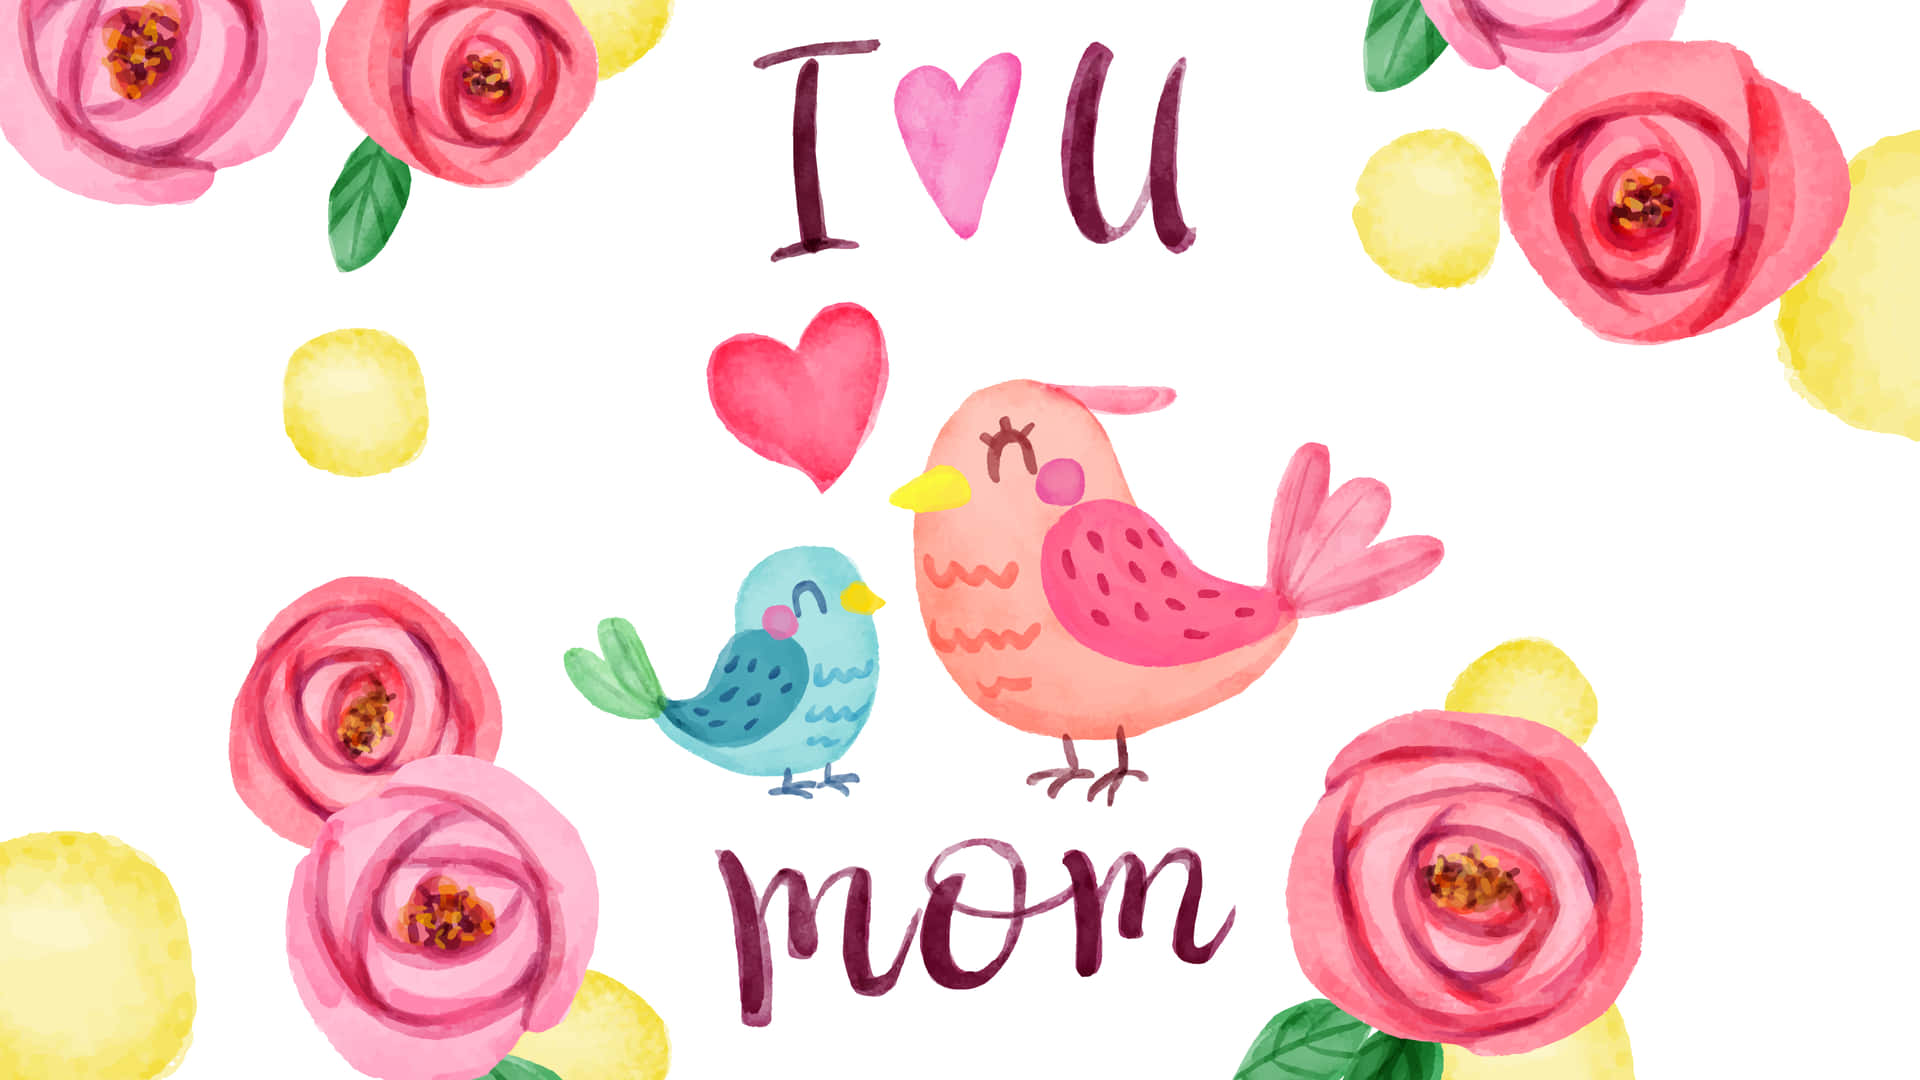 Celebrate Every Mother With Love And Appreciation This Happy Mothers Day